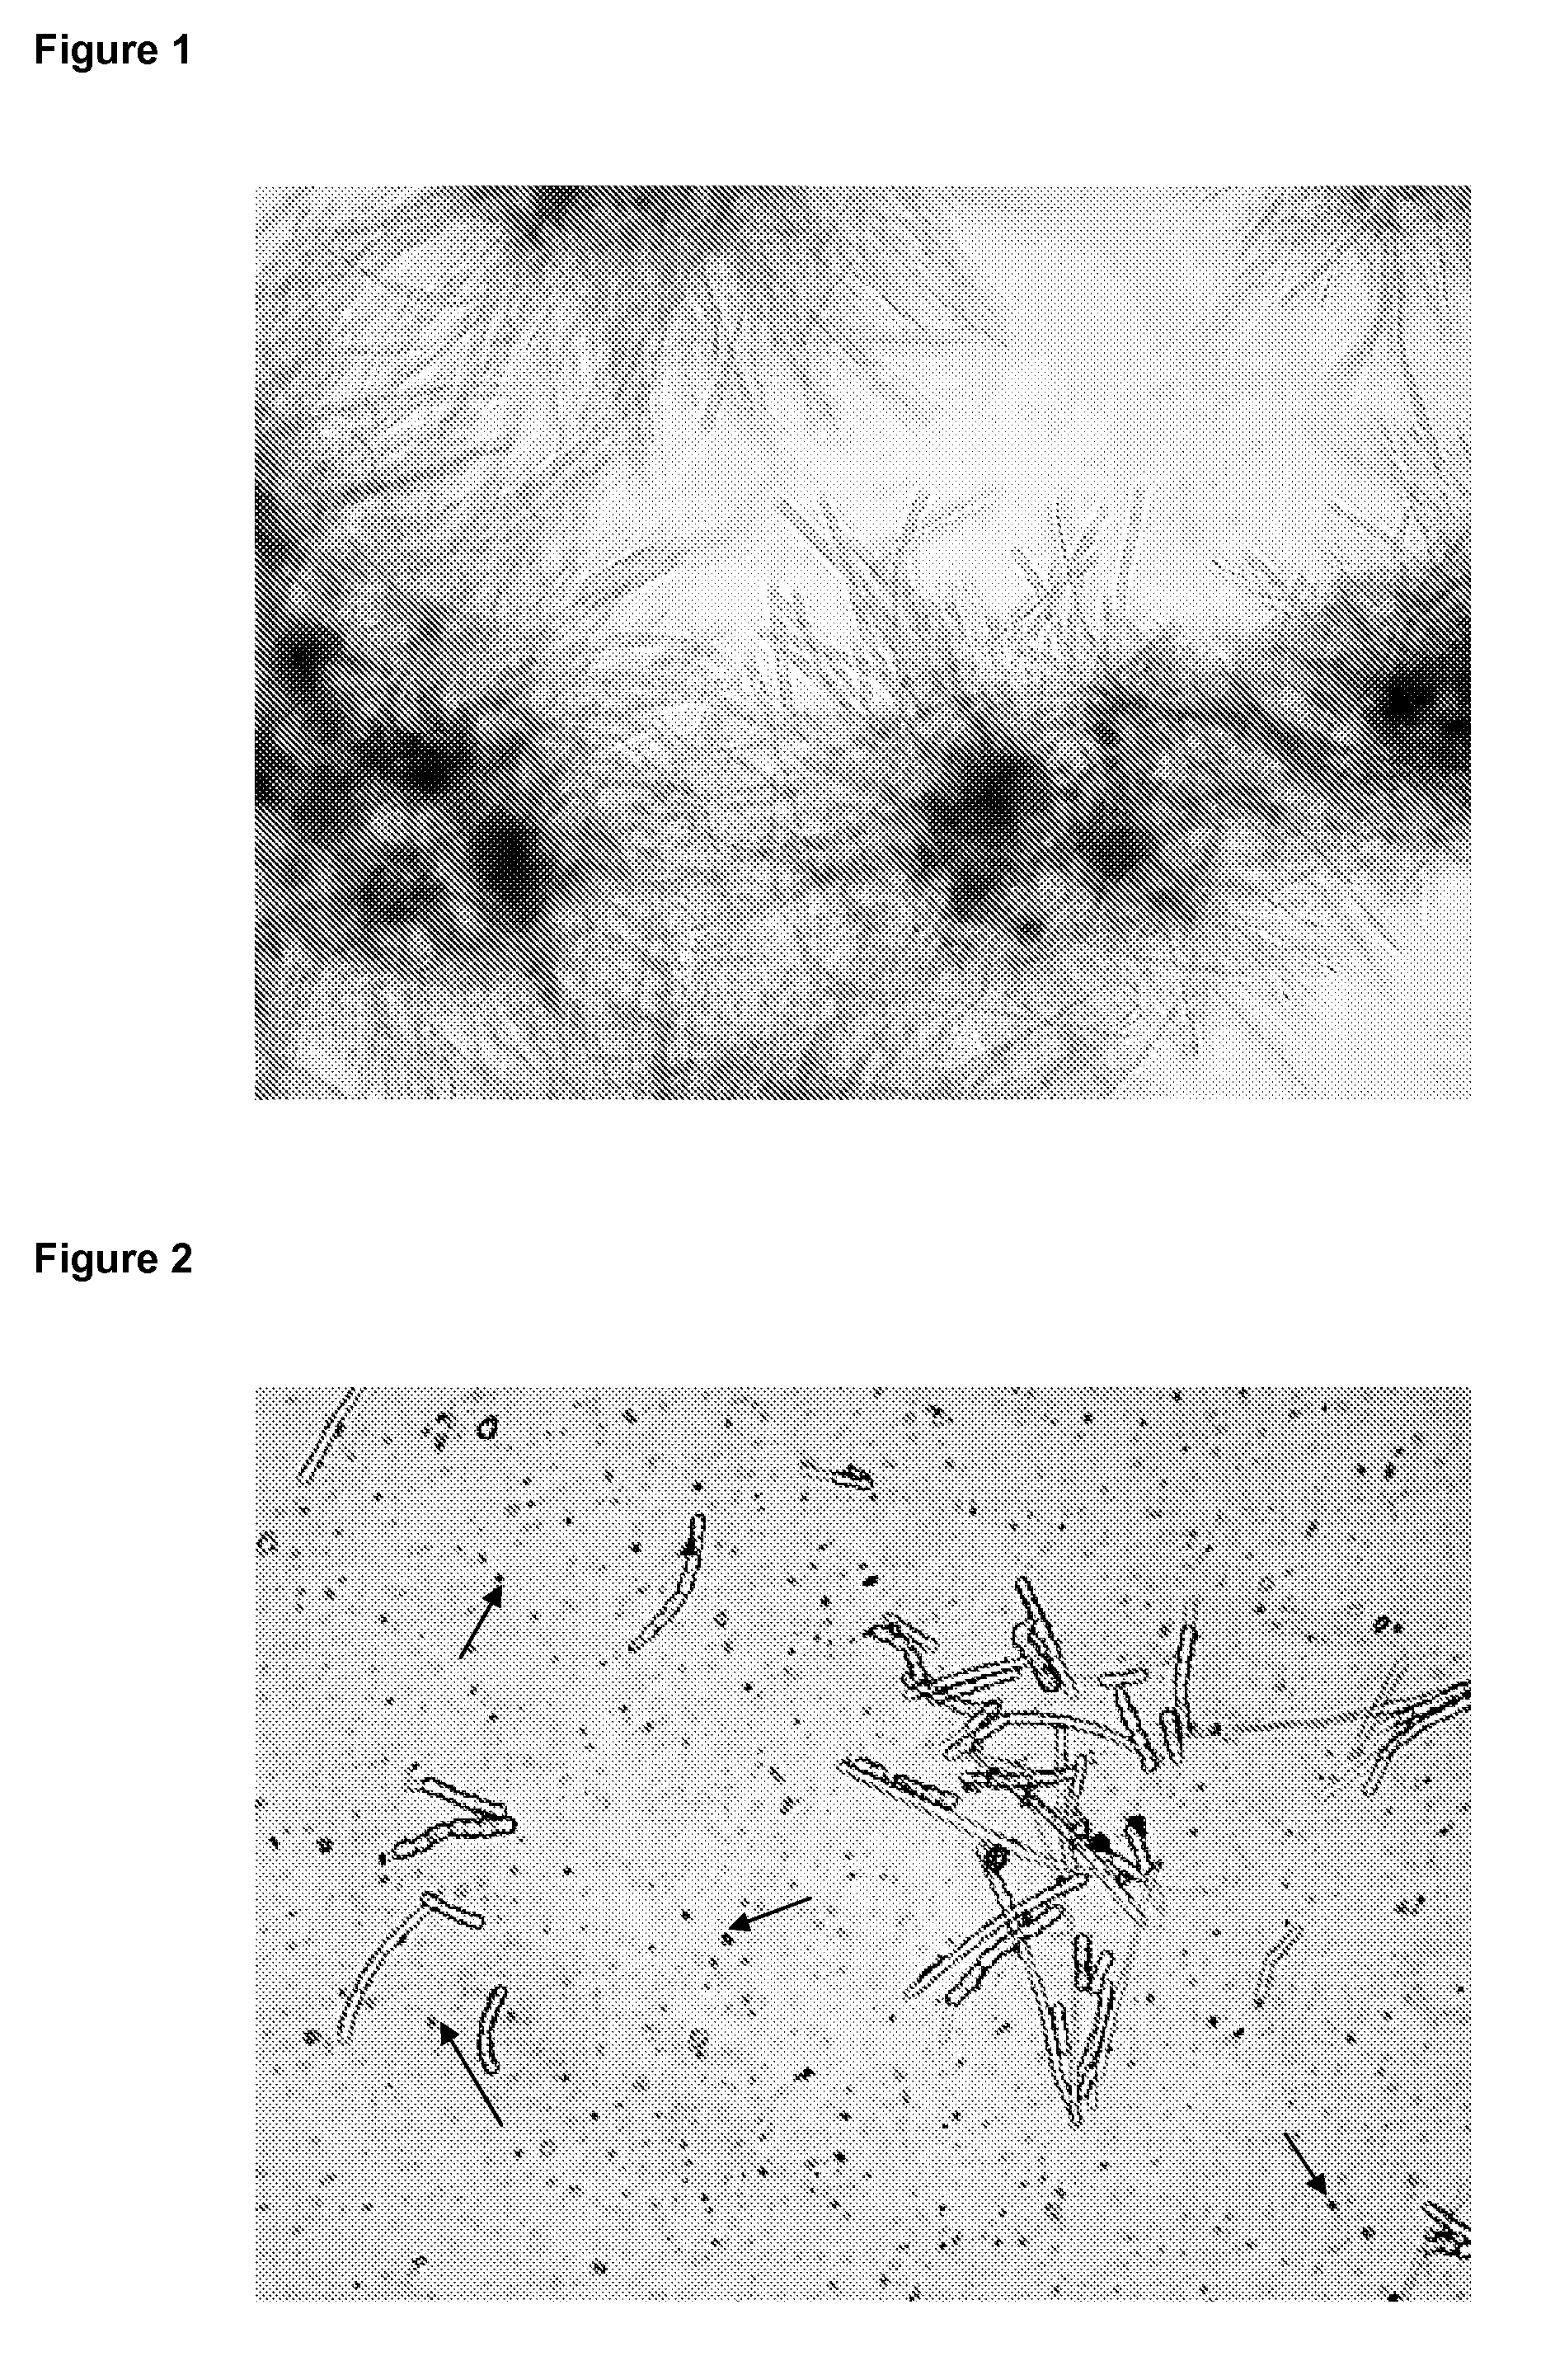 Method for the submerged cultivation of filamentous organisms